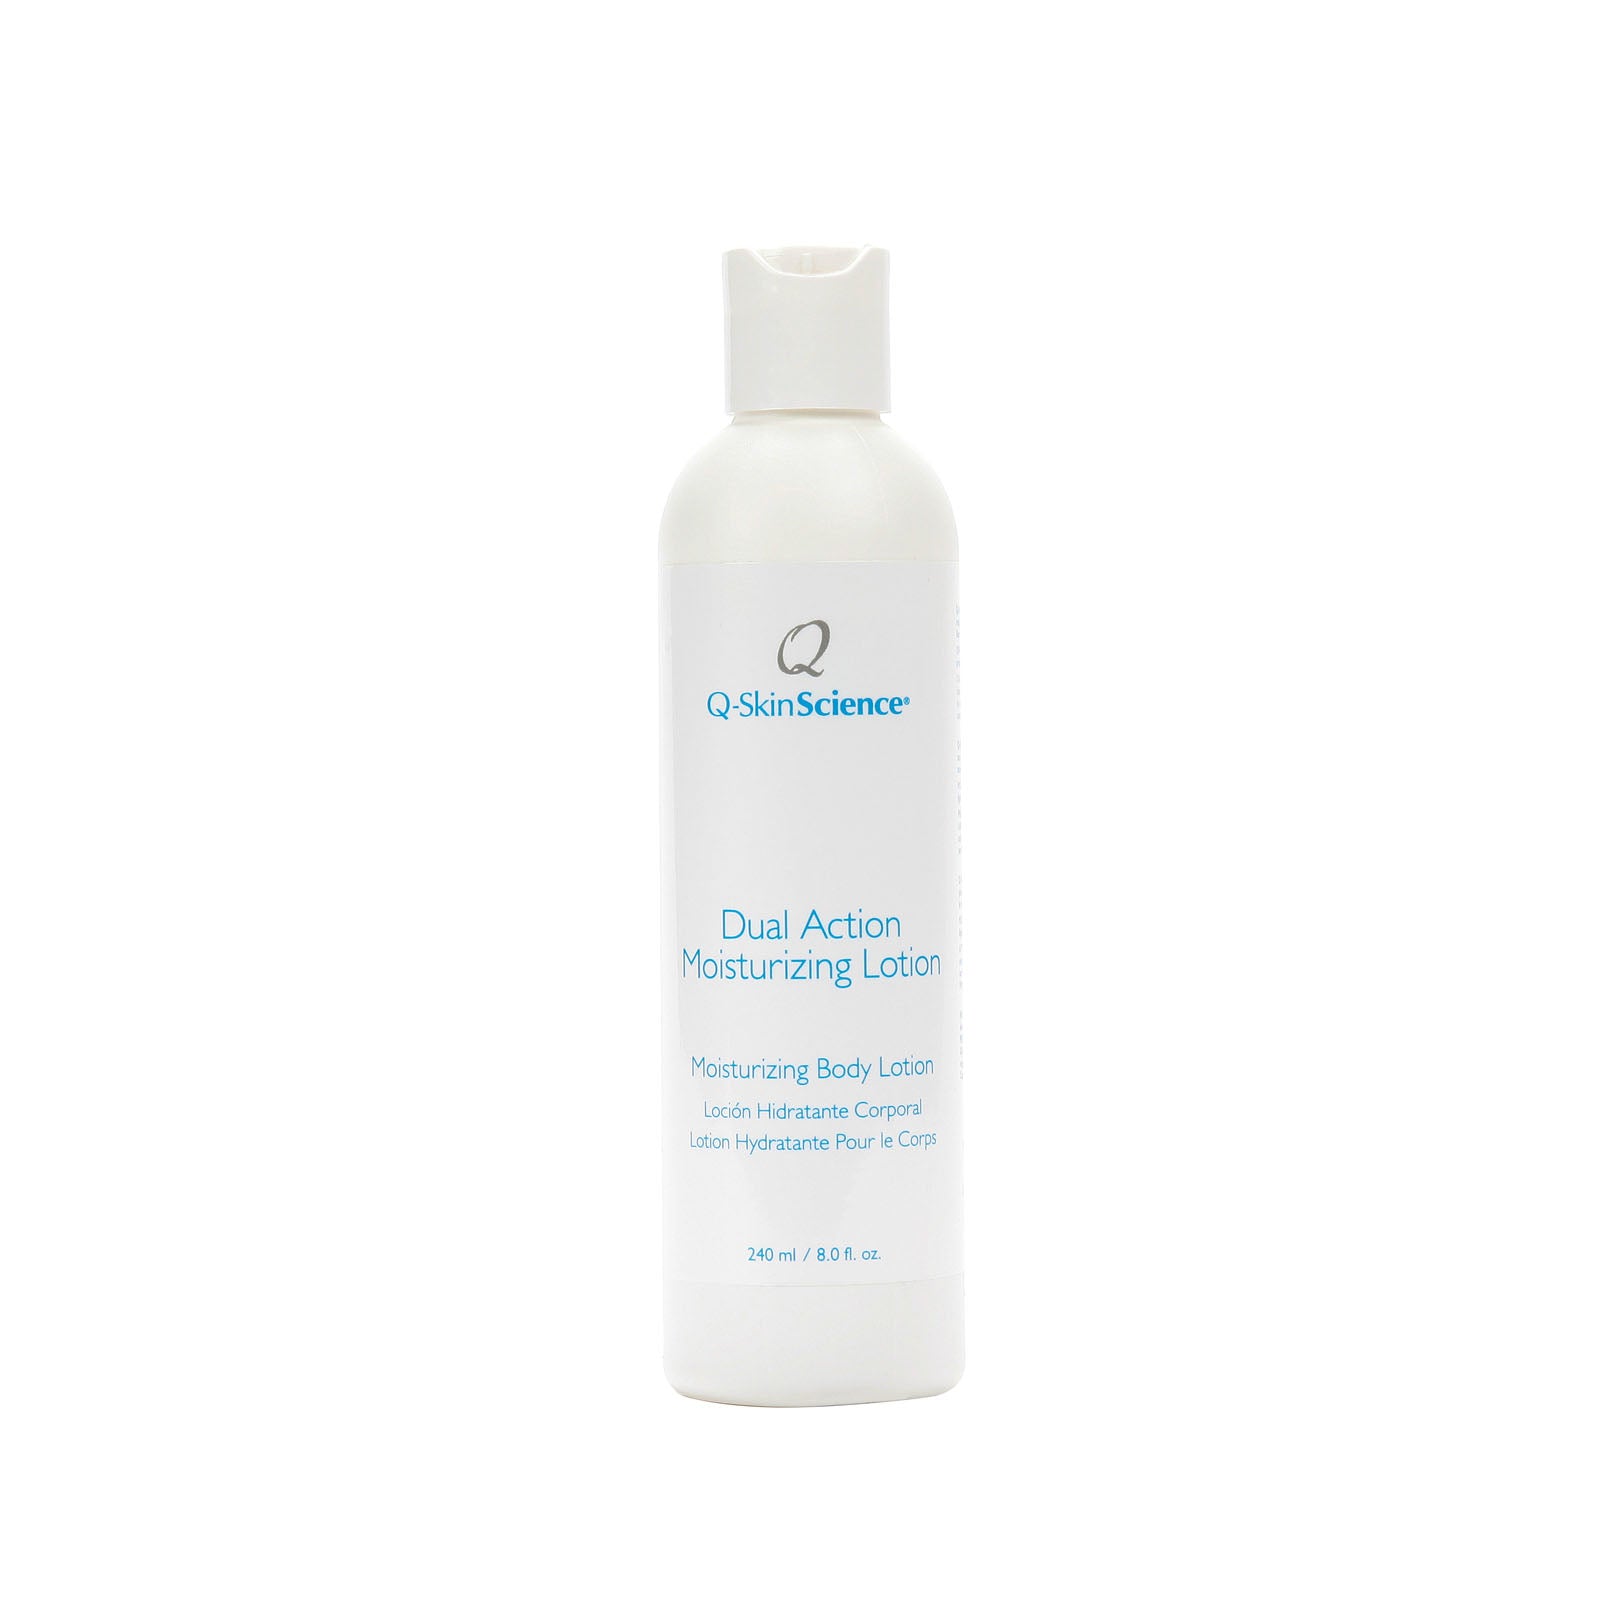 Q-Sunshade Leave in Conditioner & Scalp Protectant SPF 30